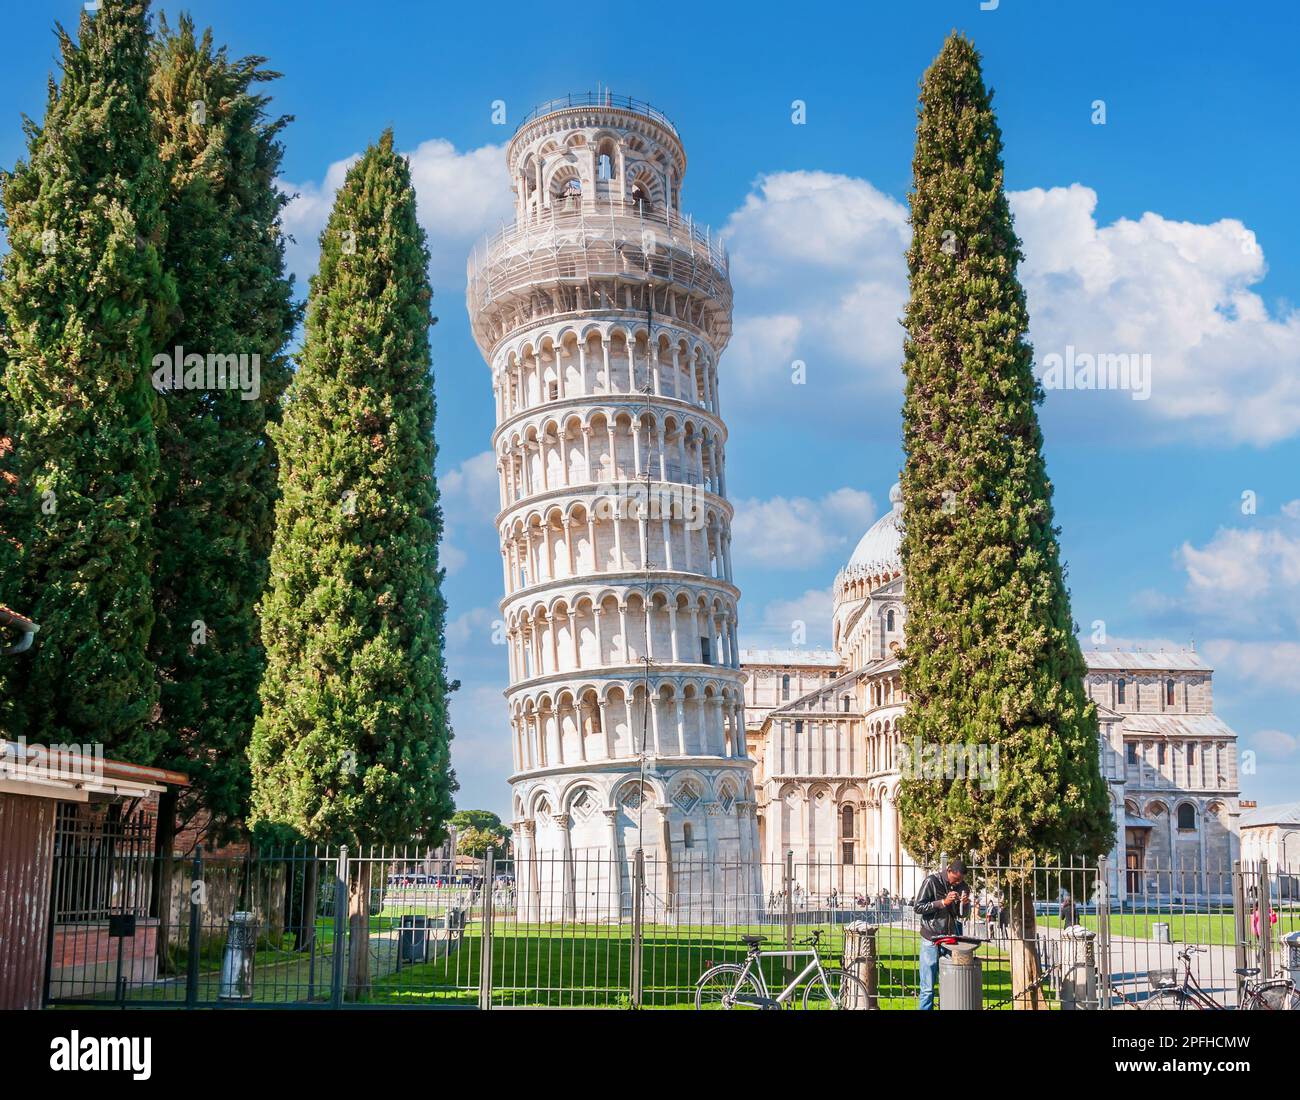 Panorama of the Cathedral of Our Lady of the Assumption and its leaning campanile made famous around the world in Pisa, Tuscany, Italy Stock Photo